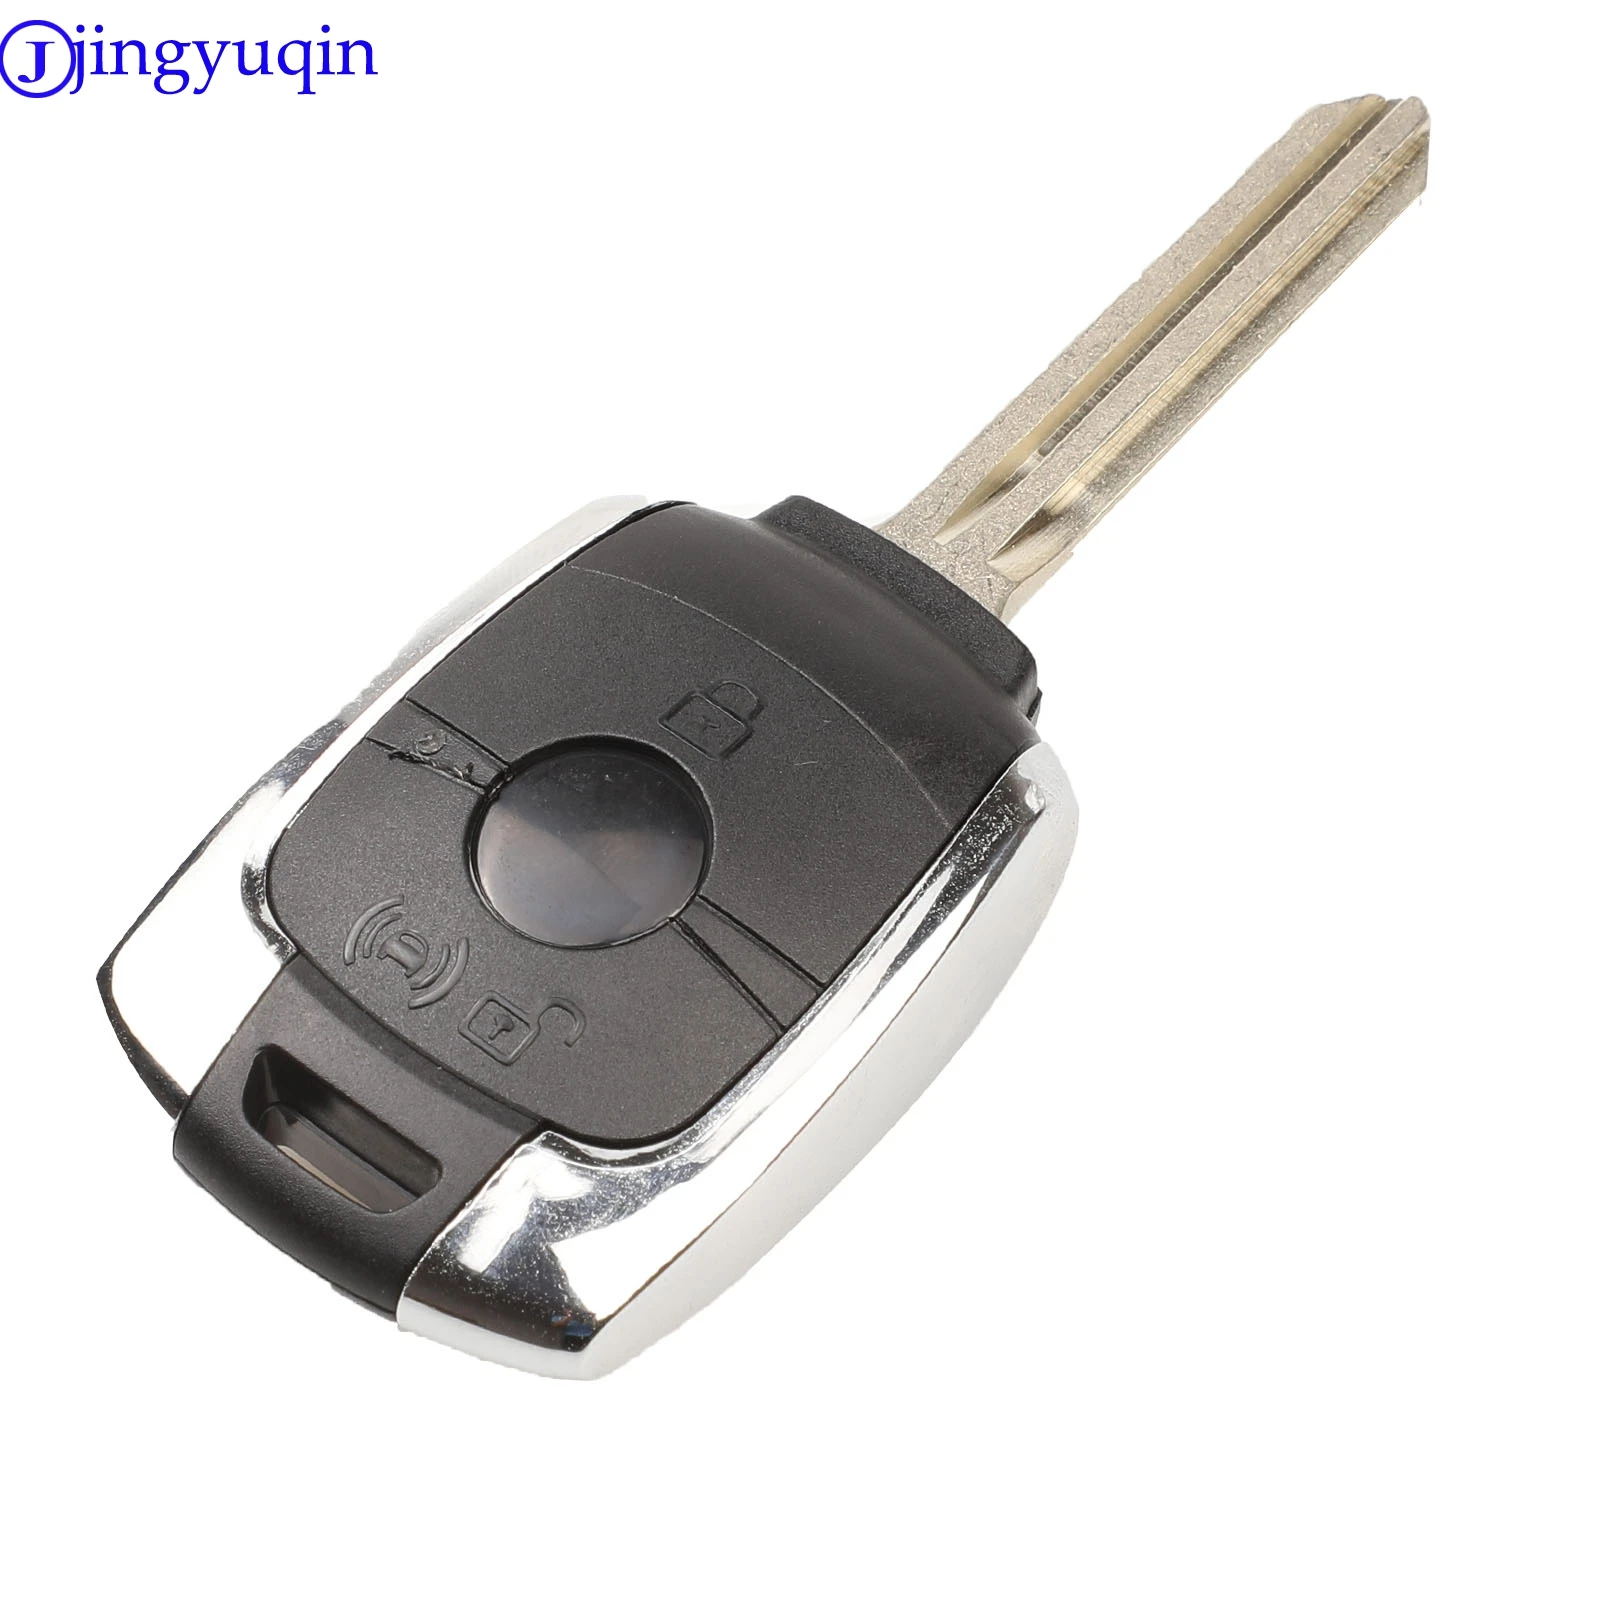 

jingyuqin 2 Buttons Replacement Remote Key Shell Case Fob For SsangYong Actyon Kyron Rexton Korando With Uncut Blade car keys